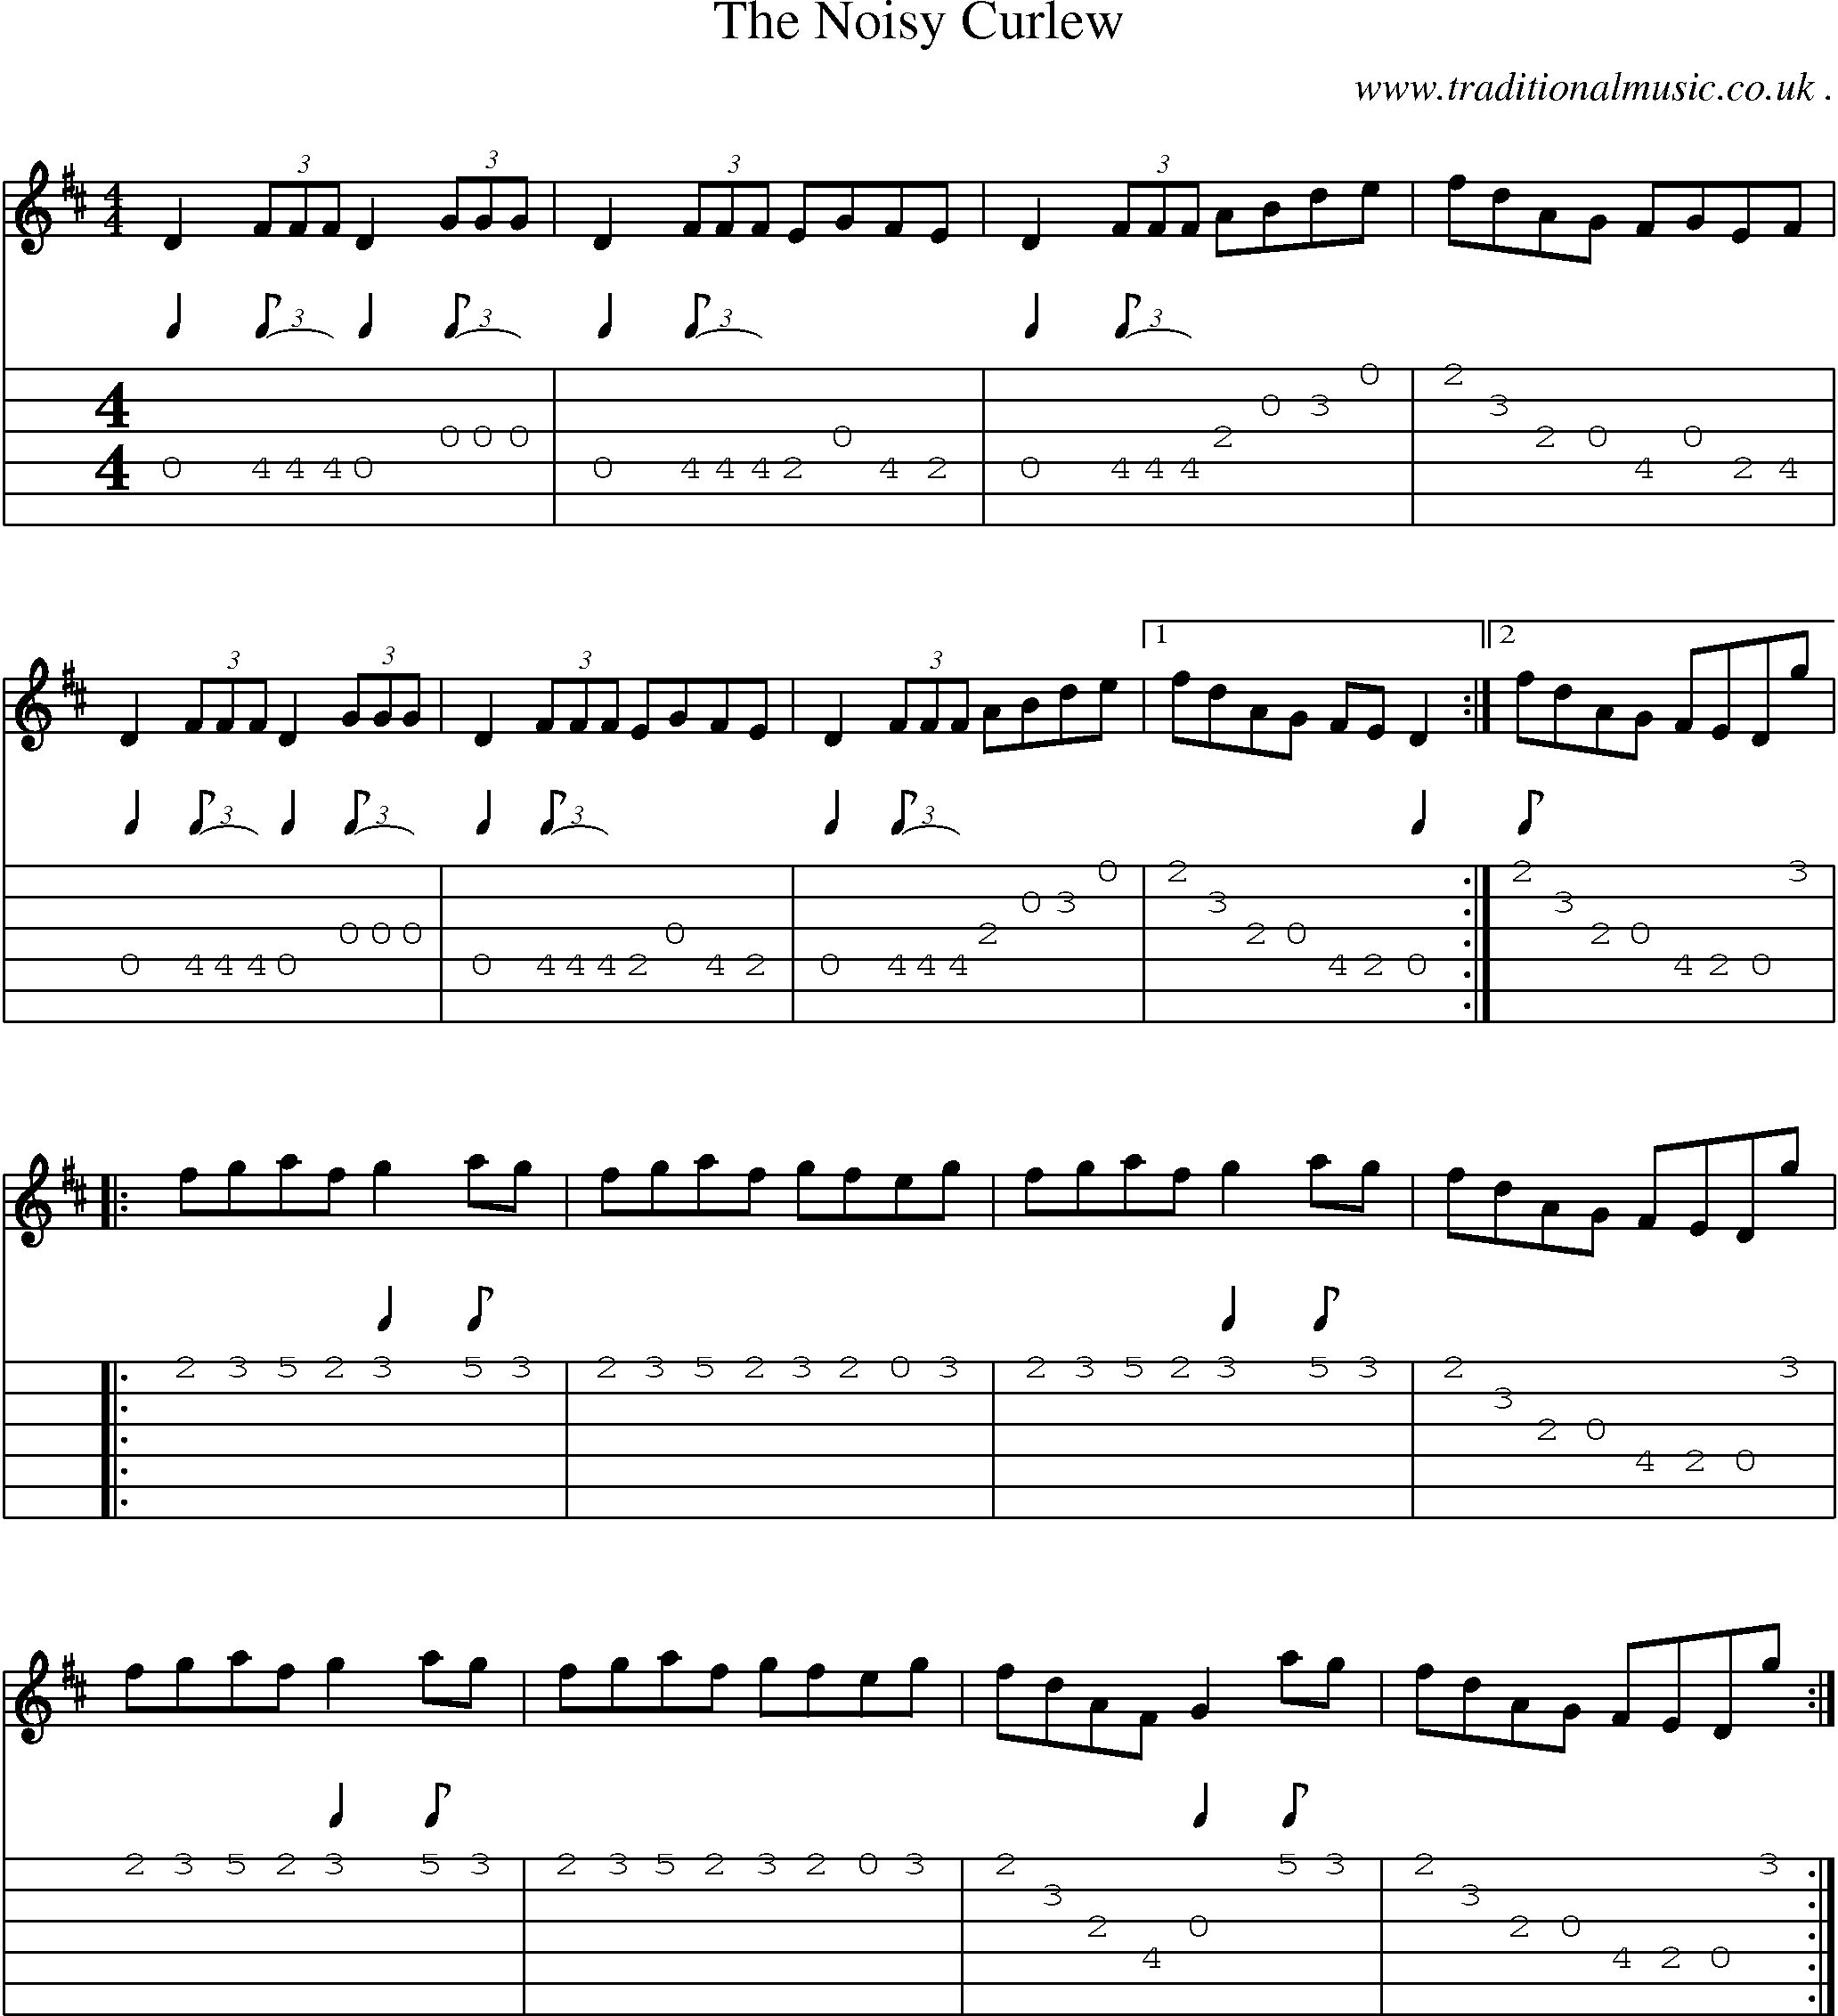 Sheet-Music and Guitar Tabs for The Noisy Curlew